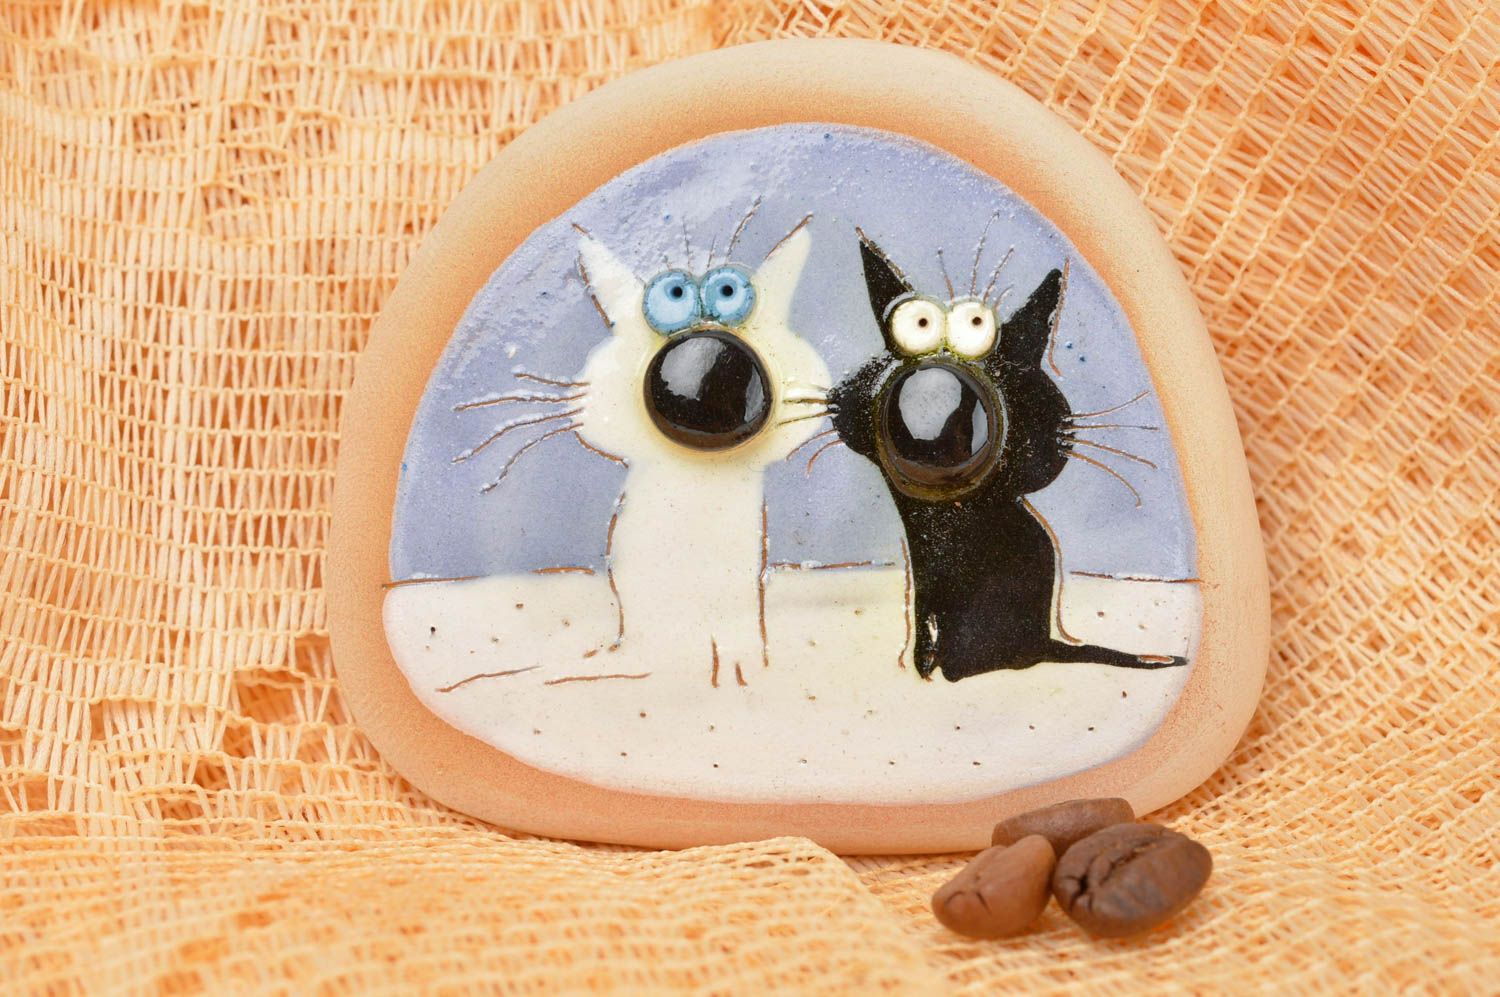 Beautiful handmade fridge magnet funny clay magnets home decoration gift ideas photo 1